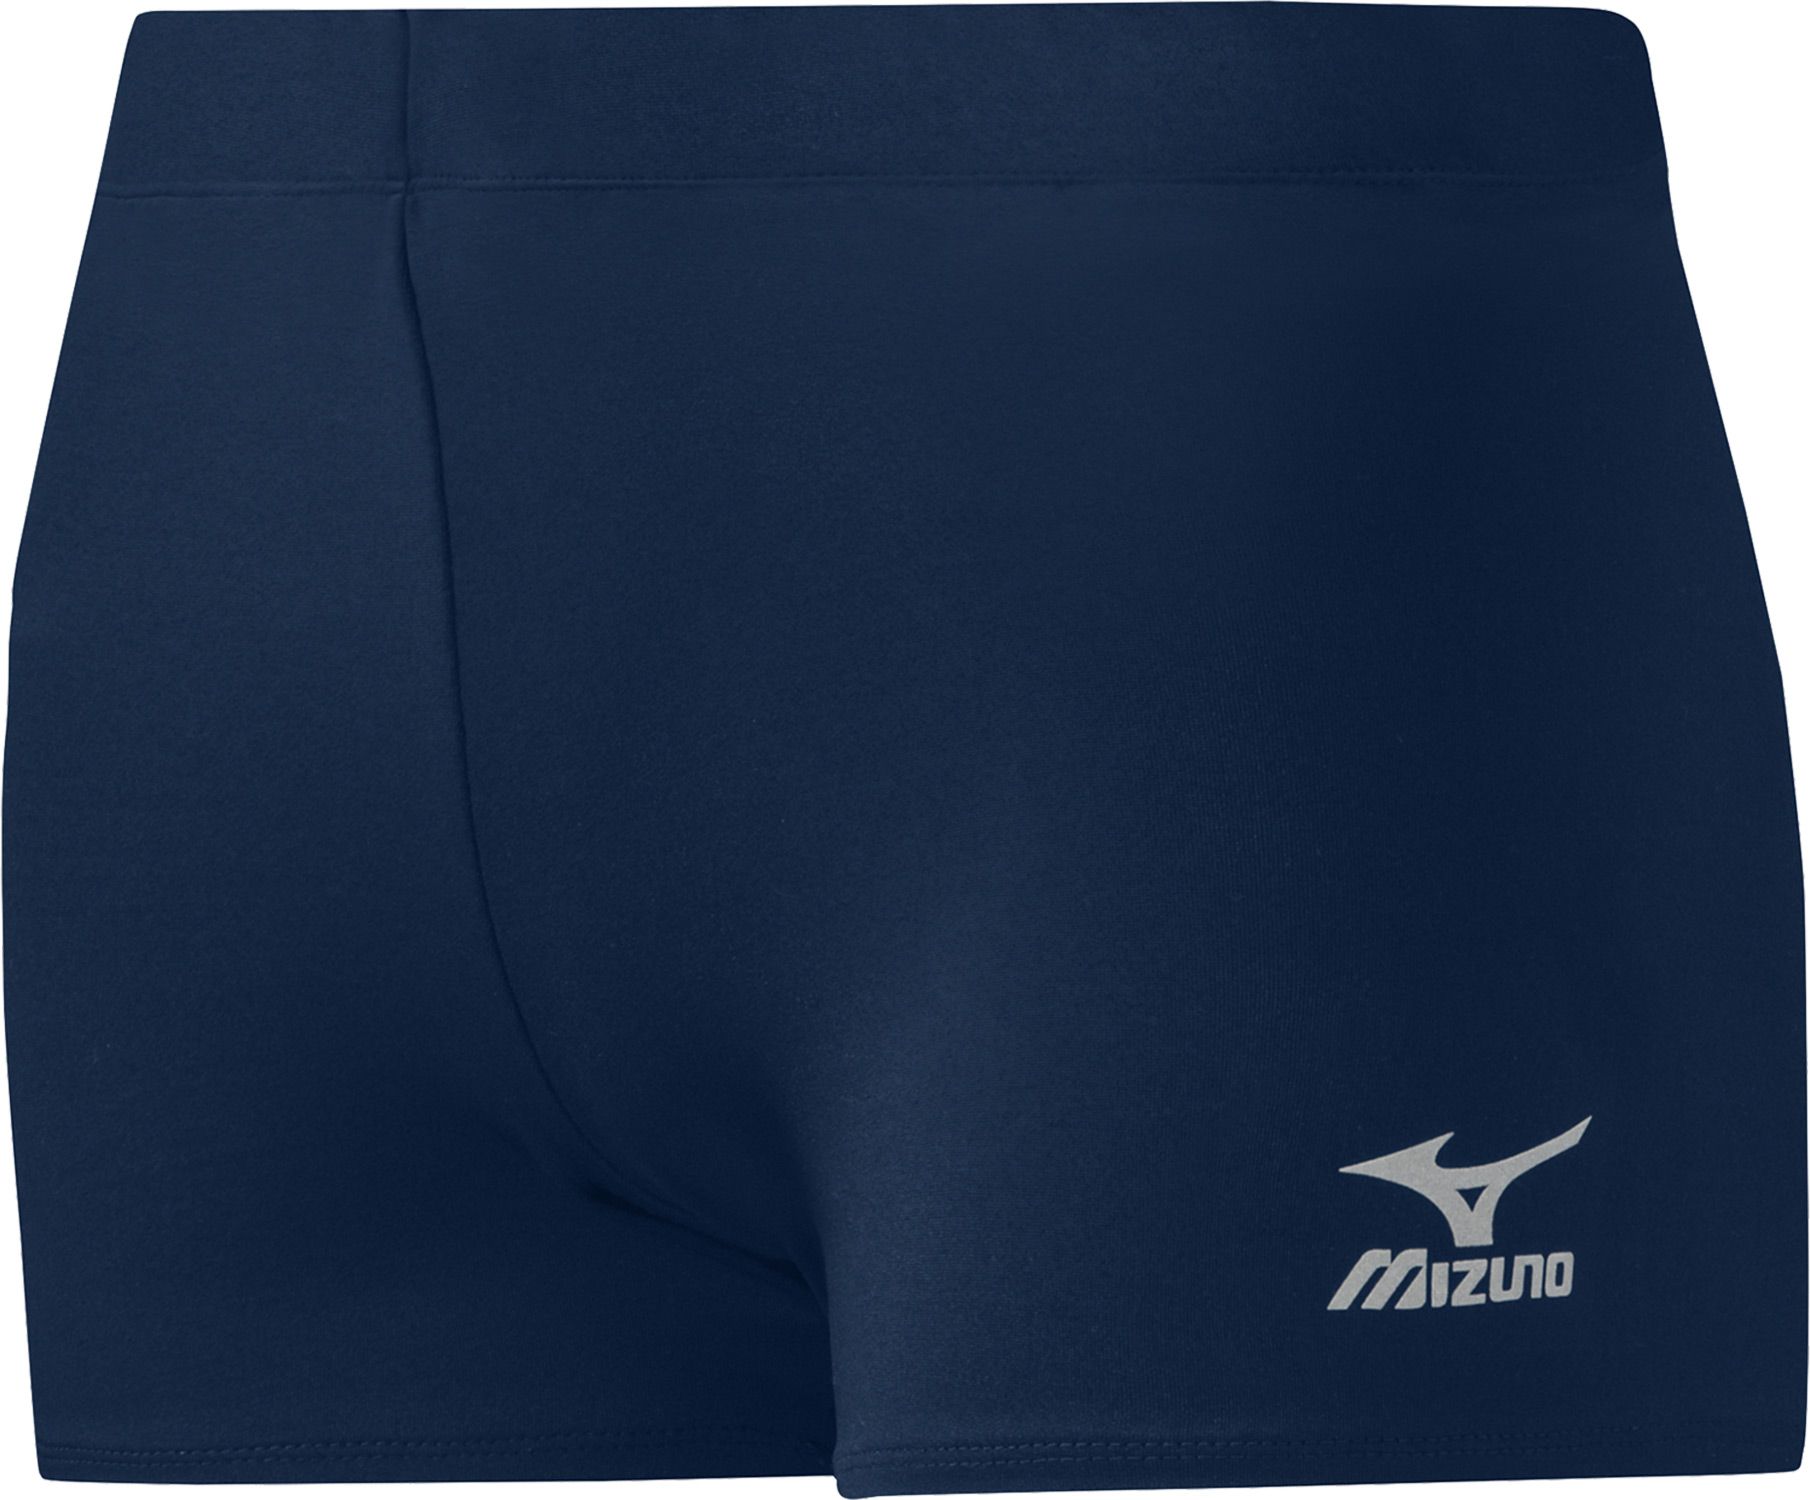 Women's Workout Shorts | DICK'S Sporting Goods